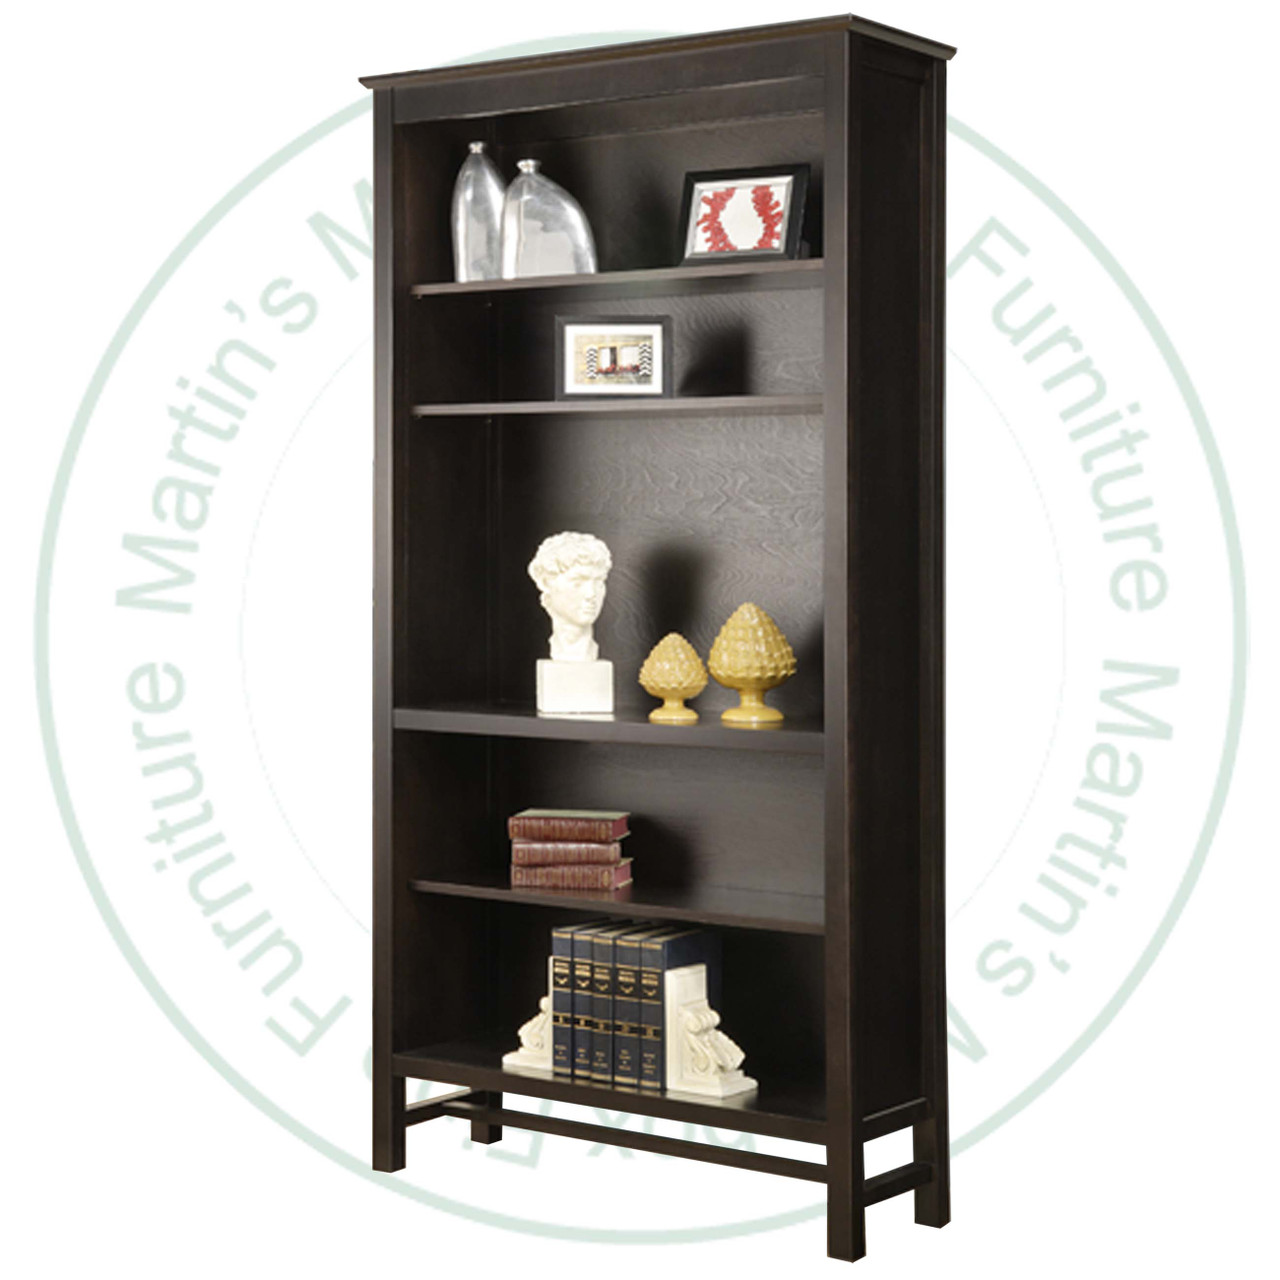 Wormy Maple Brooklyn Bookcase 14'' Deep x 41'' Wide x 80'' High With 3 Adjustable Shelves